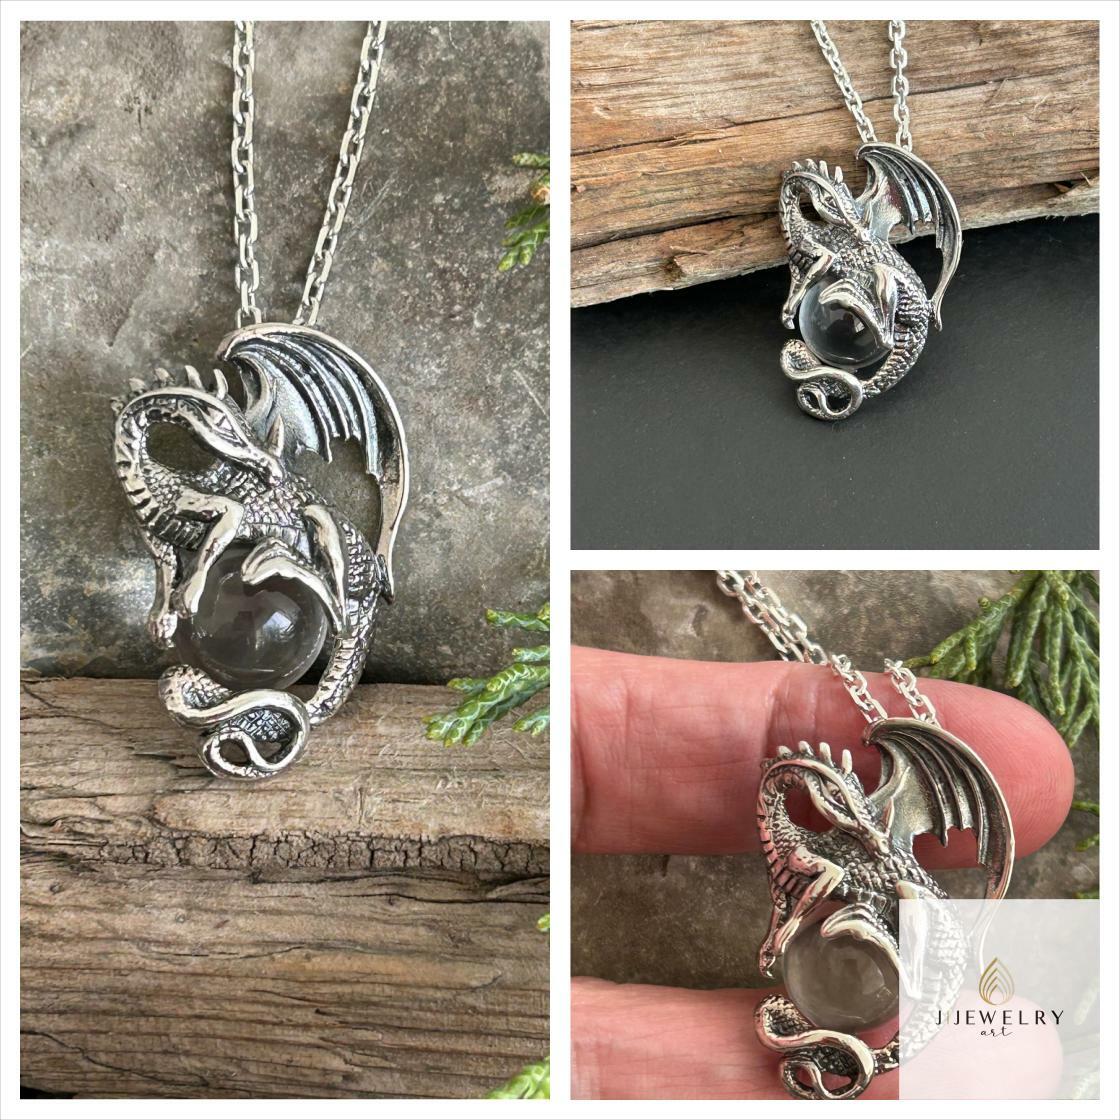 🐣. Offer Xtras! Dragon silver necklace, 925 sterling silver dragon for $109.00 #JewelryForMen #UniqueJewelry